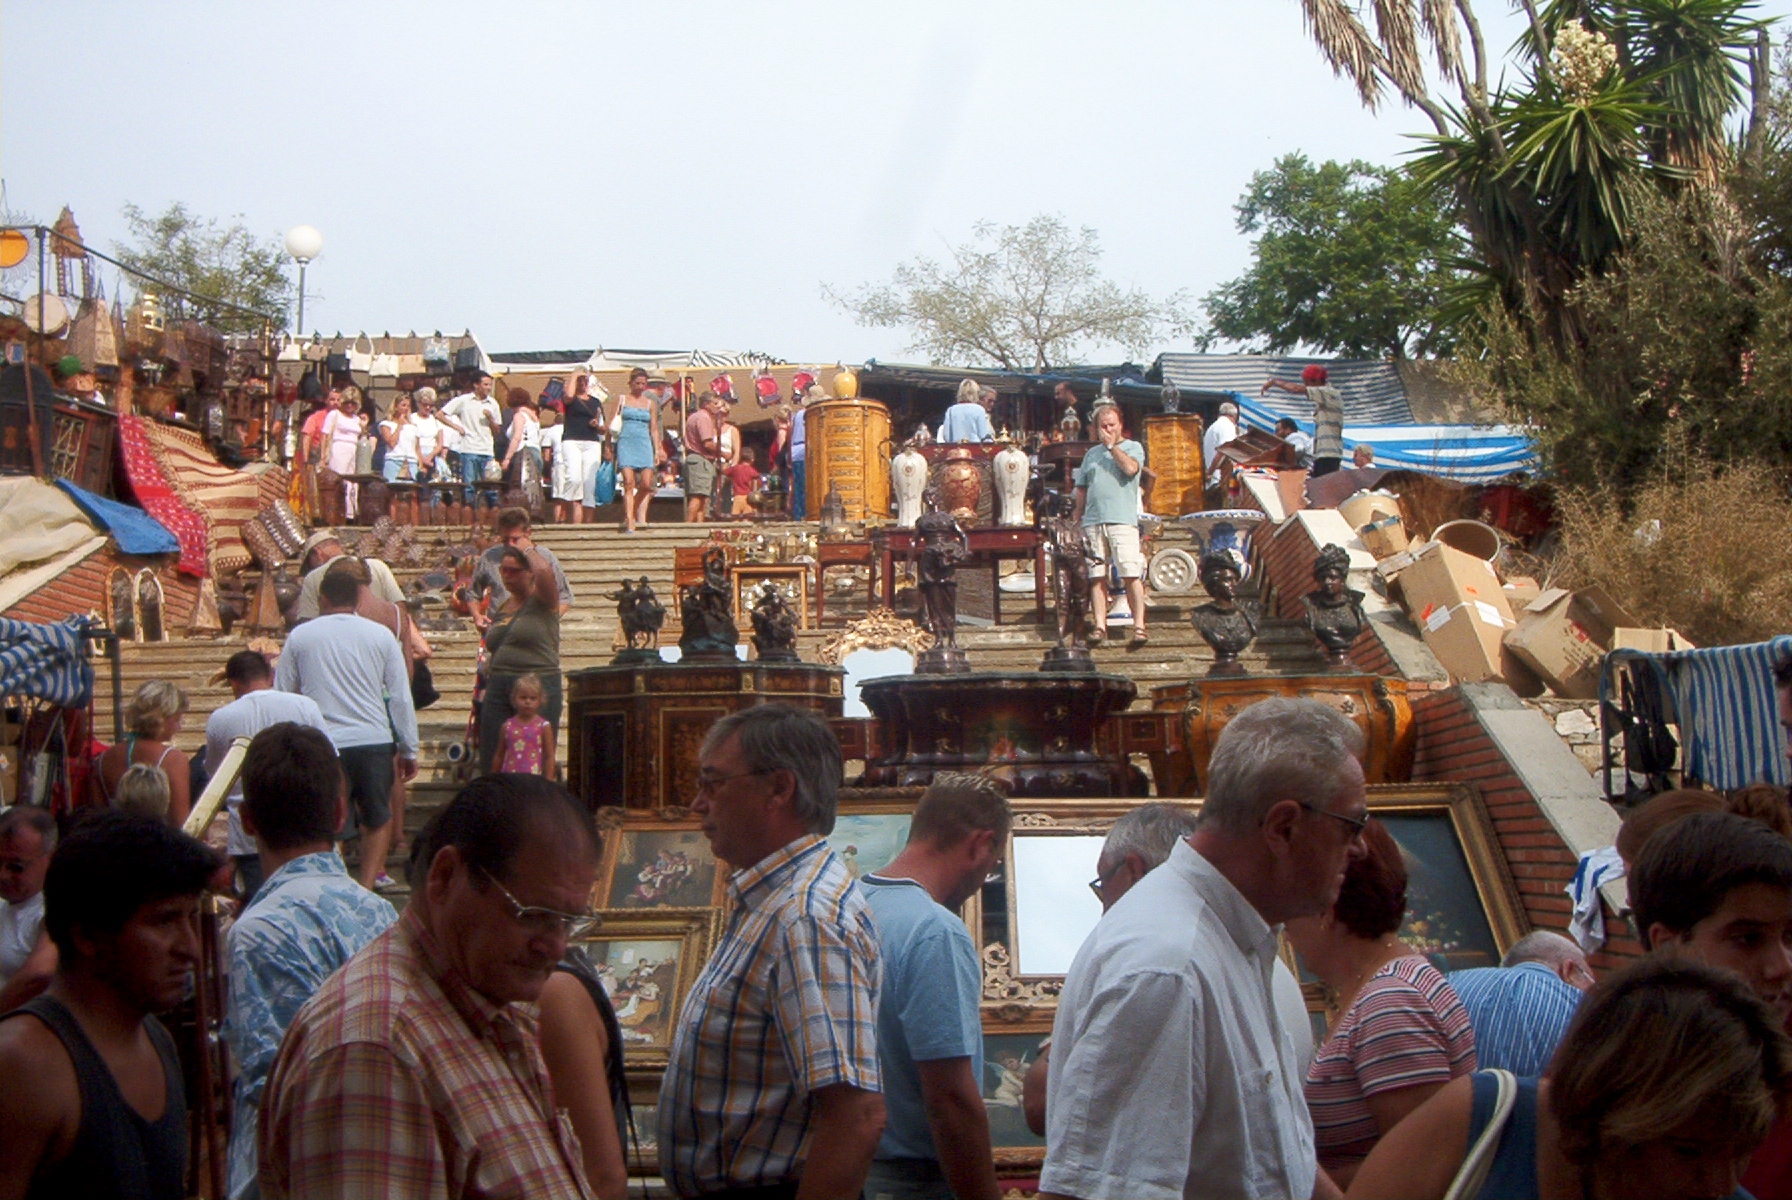 Puerto Banus Summer Market for great night time craft shopping